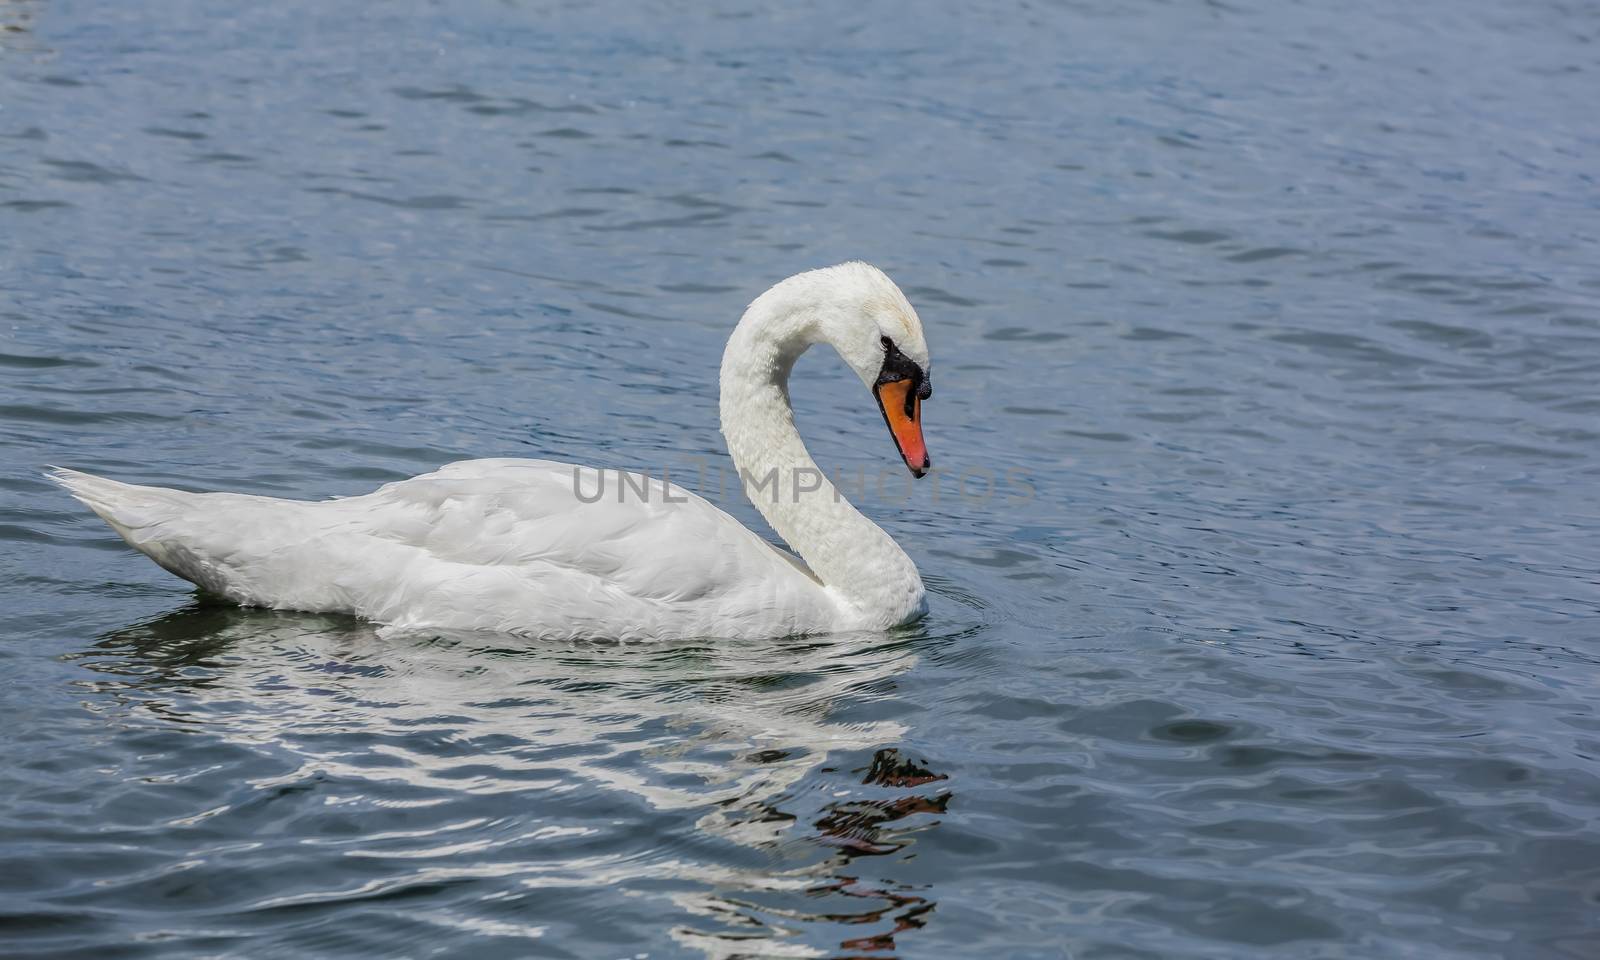 A beautiful white swan swimming alone in a lake on a sunny day in Montreal City, Canada.